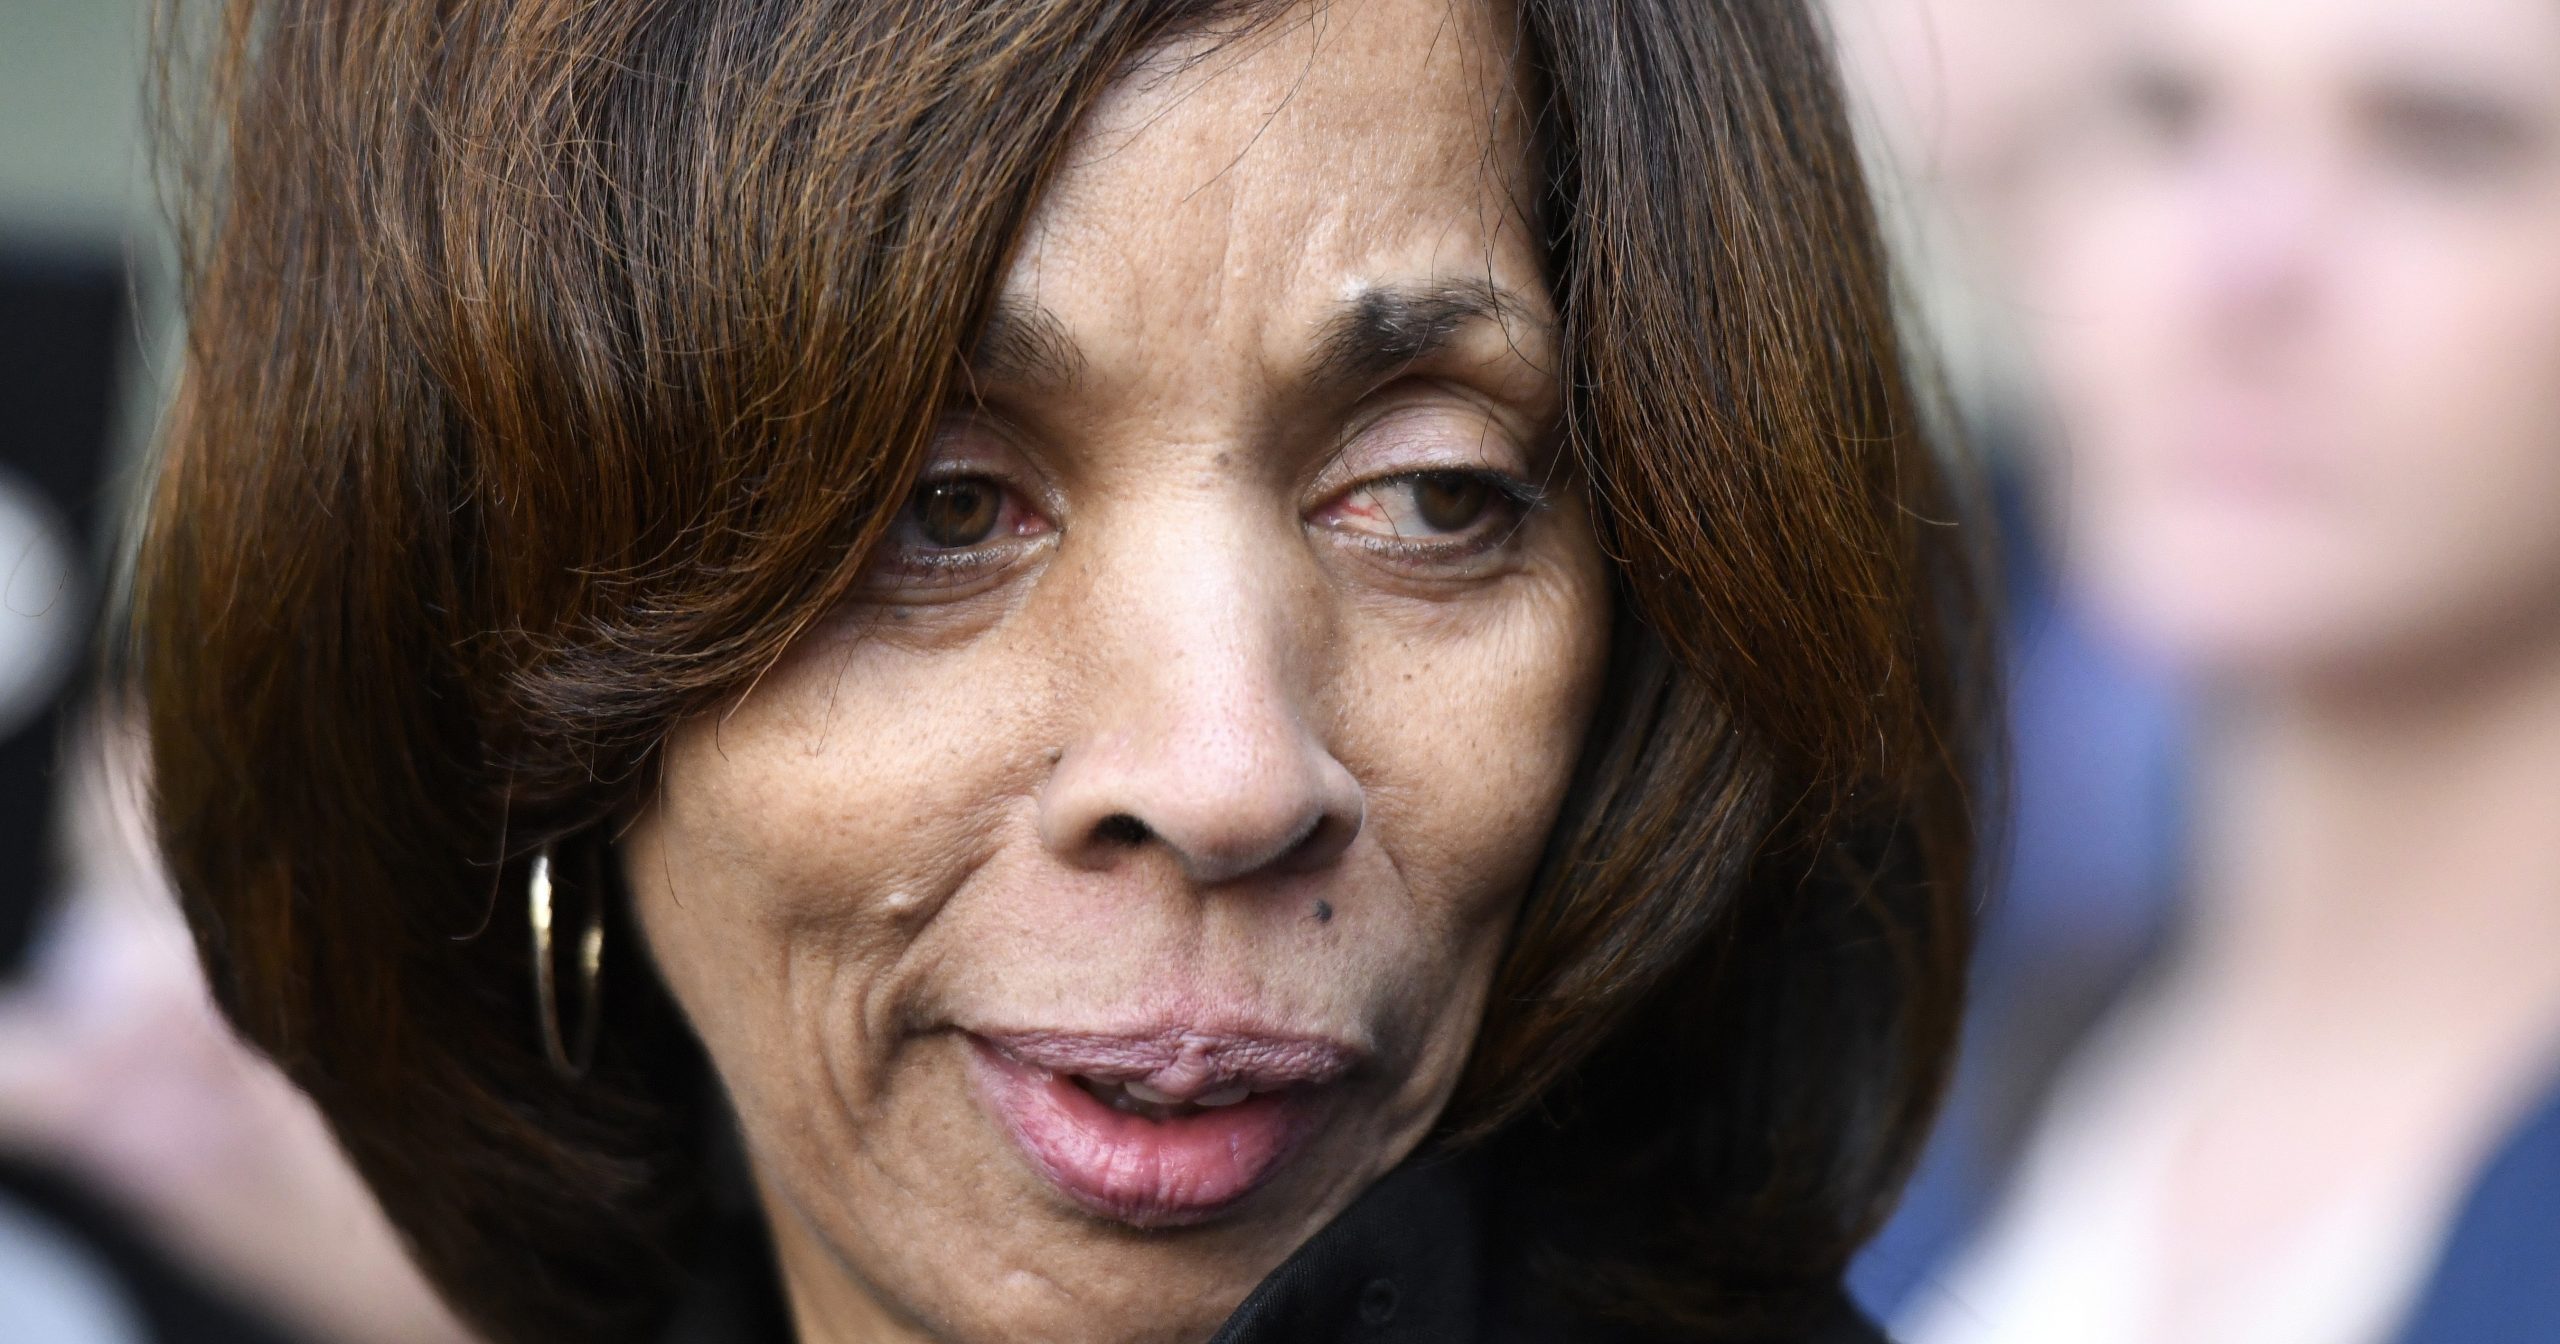 In this Feb. 27, 2020, file photo, former Baltimore Mayor Catherine Pugh leaves her sentencing hearing at U.S. District Court in Baltimore.